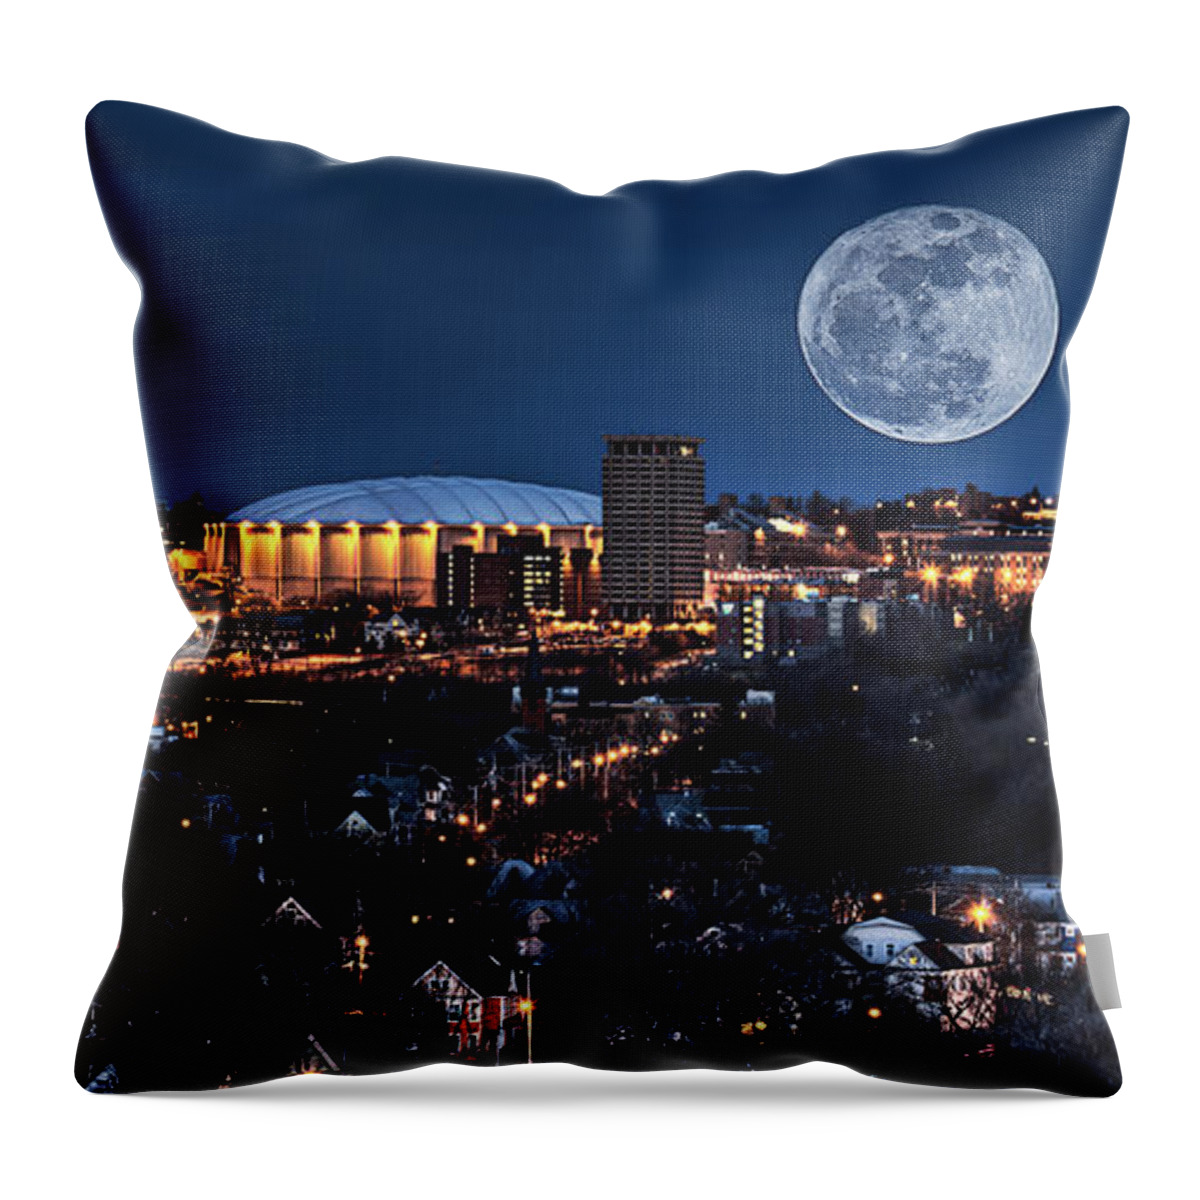 Carrier Dome Throw Pillow featuring the photograph Moon Over the Carrier Dome by Everet Regal